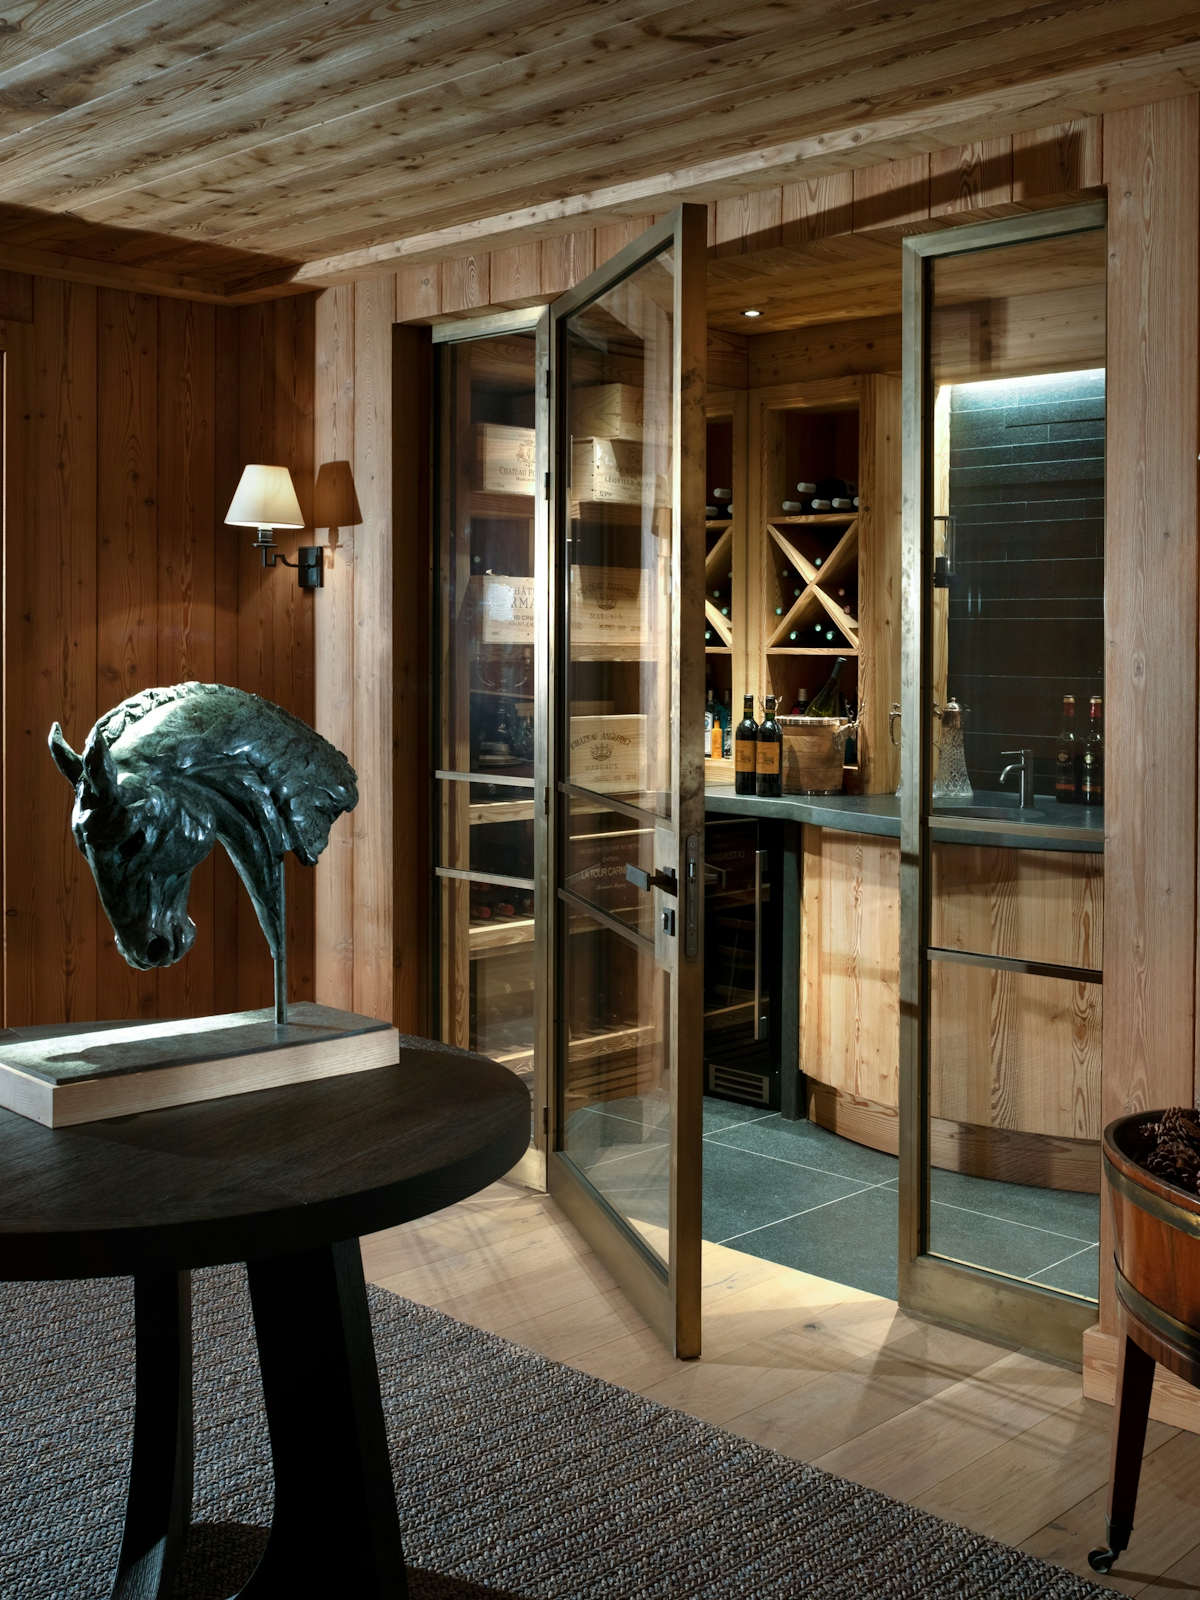 Nicky Dobree winter chalet with bronze horse statue on black wooden table, glass door opening into a wine cellar.